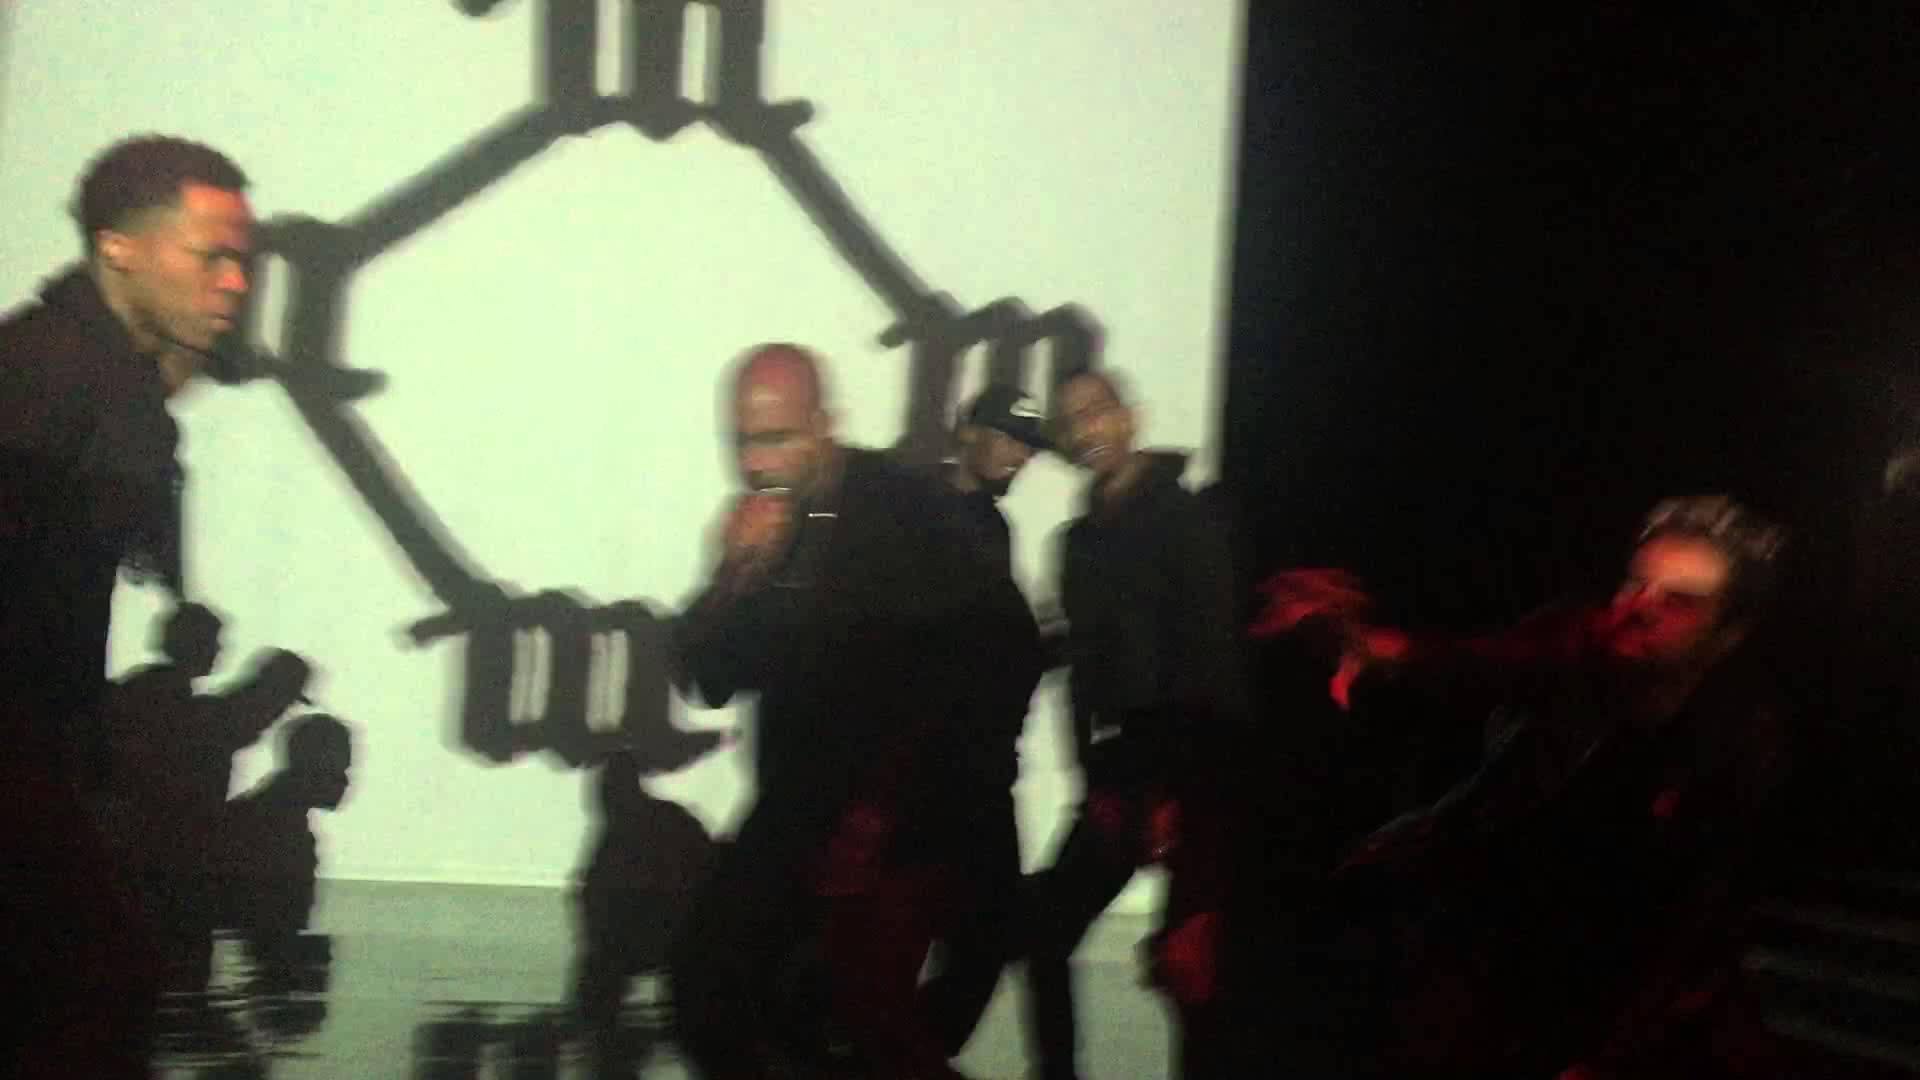 Kanye West Performs “All Day” In London (Video)